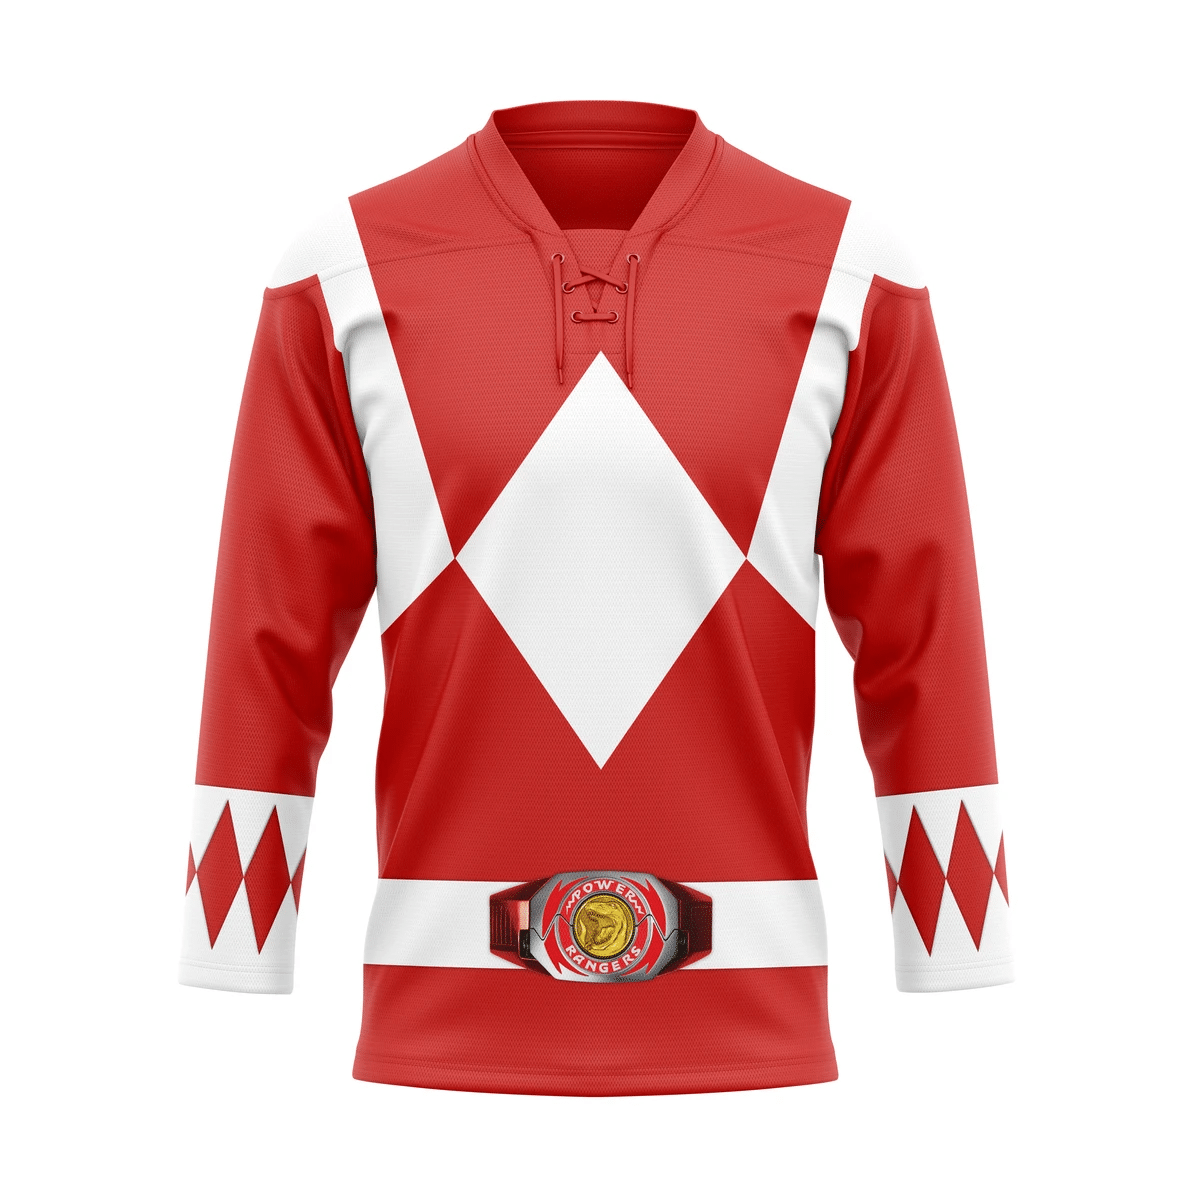 Top hot hockey jersey for NHL fans You can find out more at the bottom of the page! 39